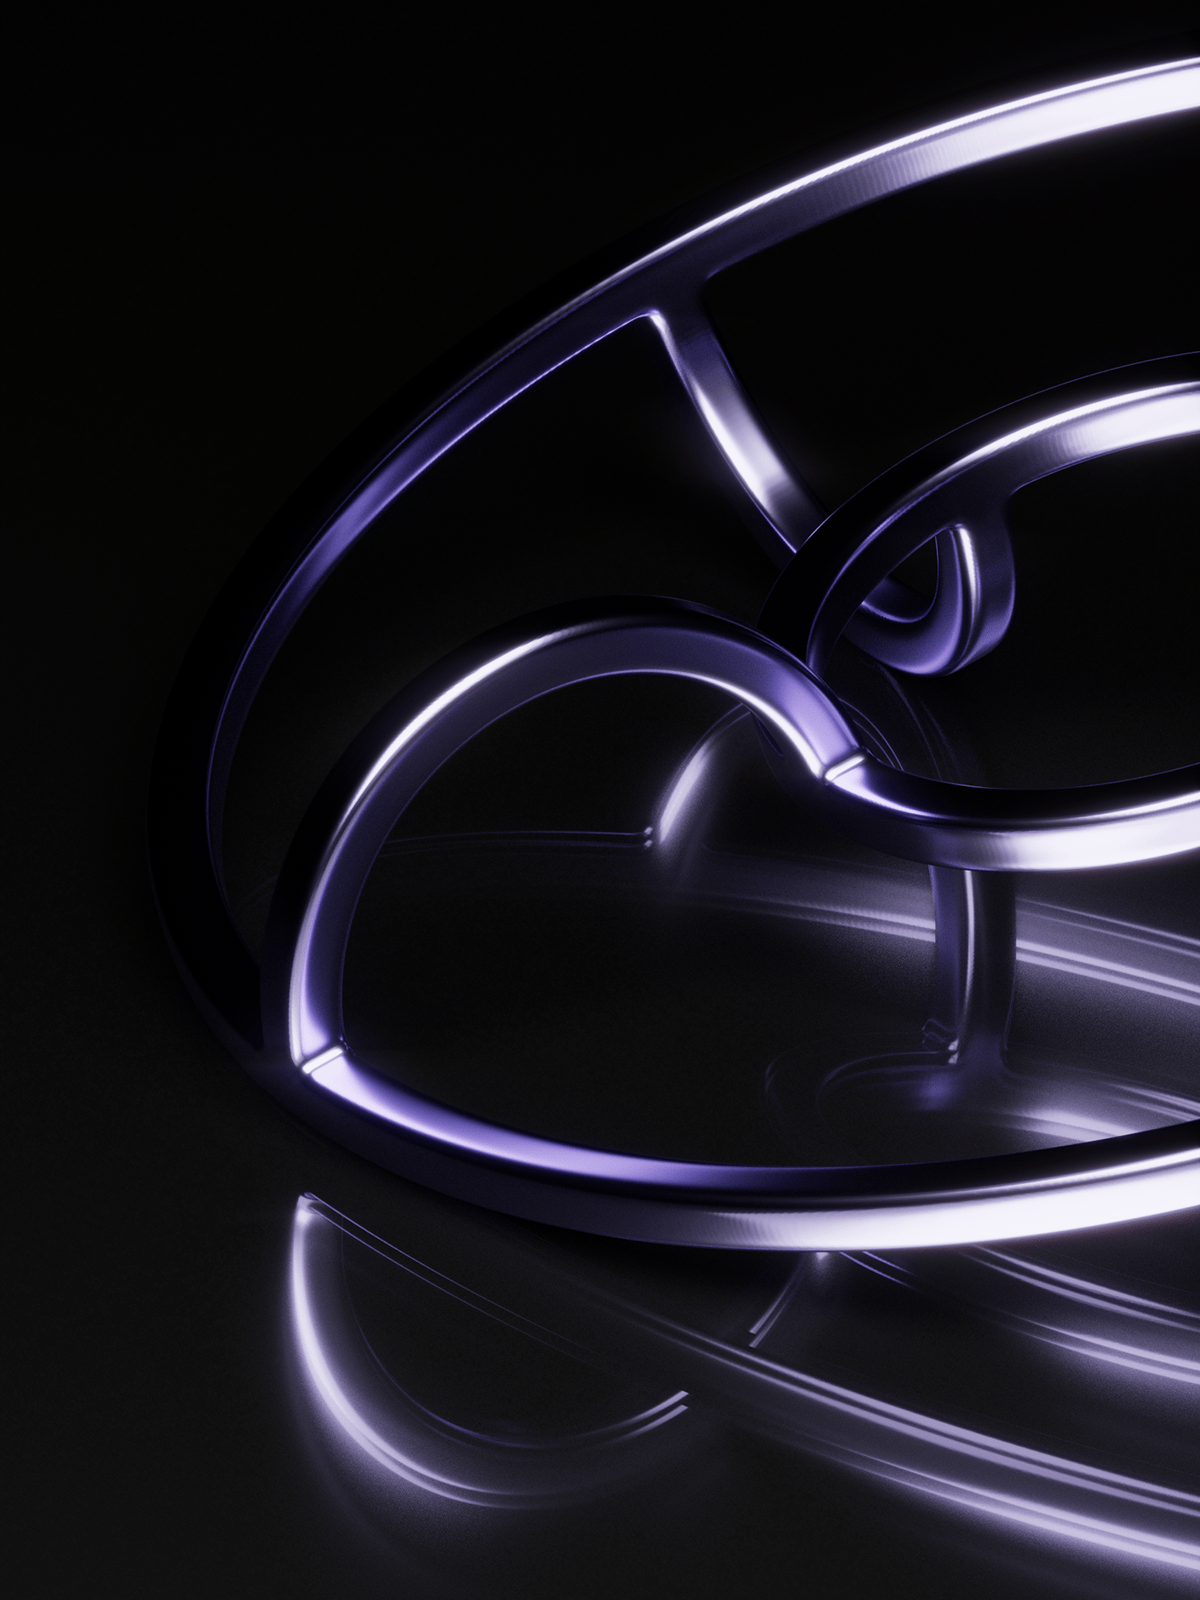 3D CG CGI houdini iphone Render vray wallpaper modelling abstract